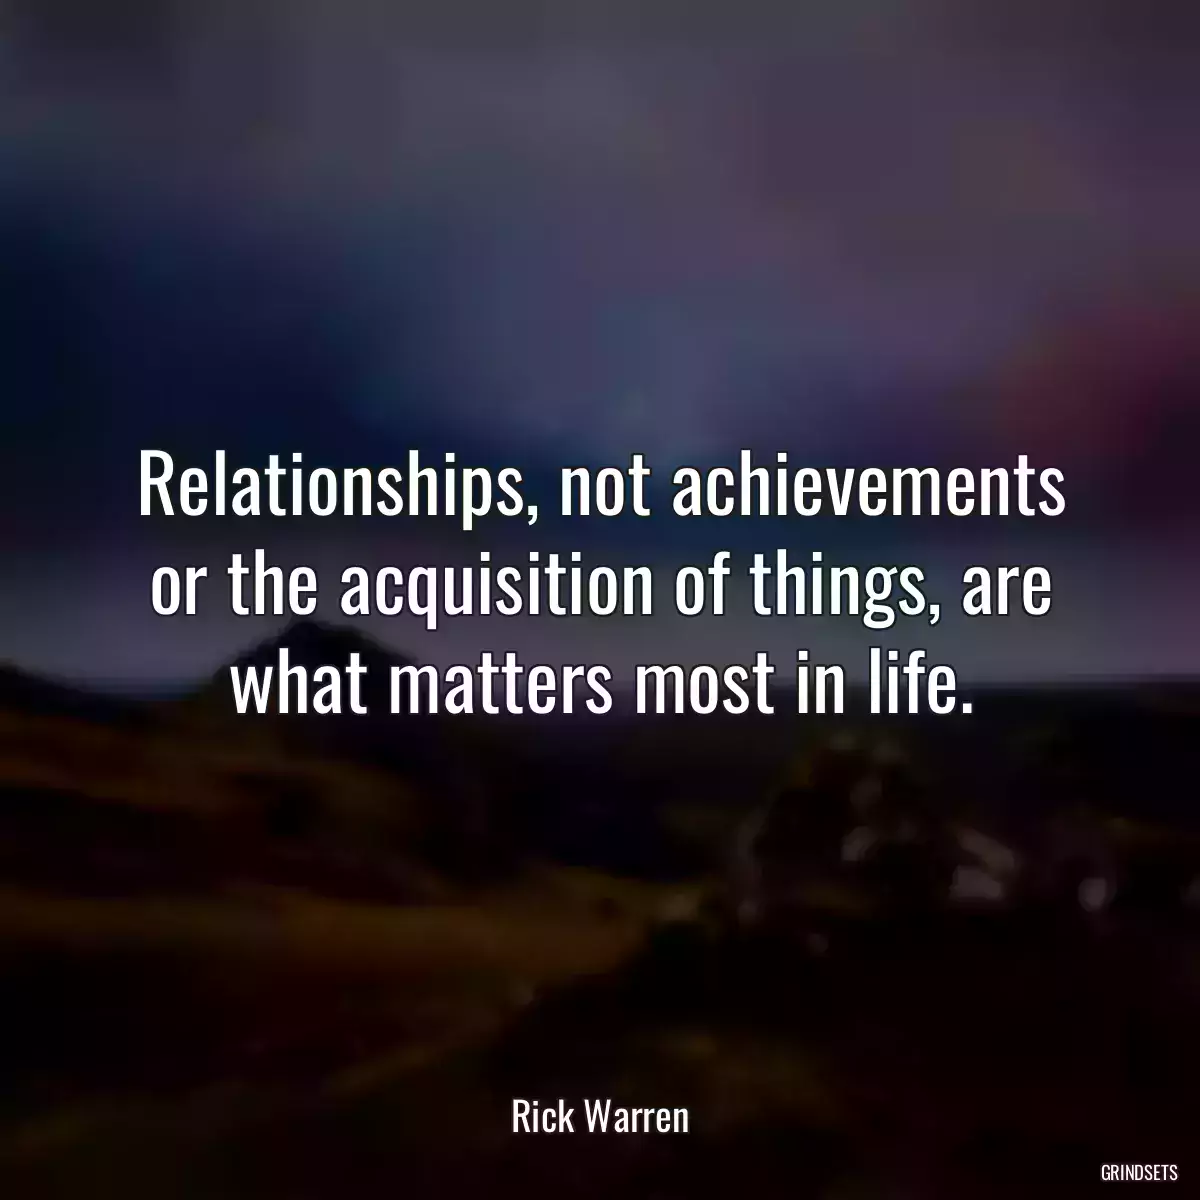 Relationships, not achievements or the acquisition of things, are what matters most in life.